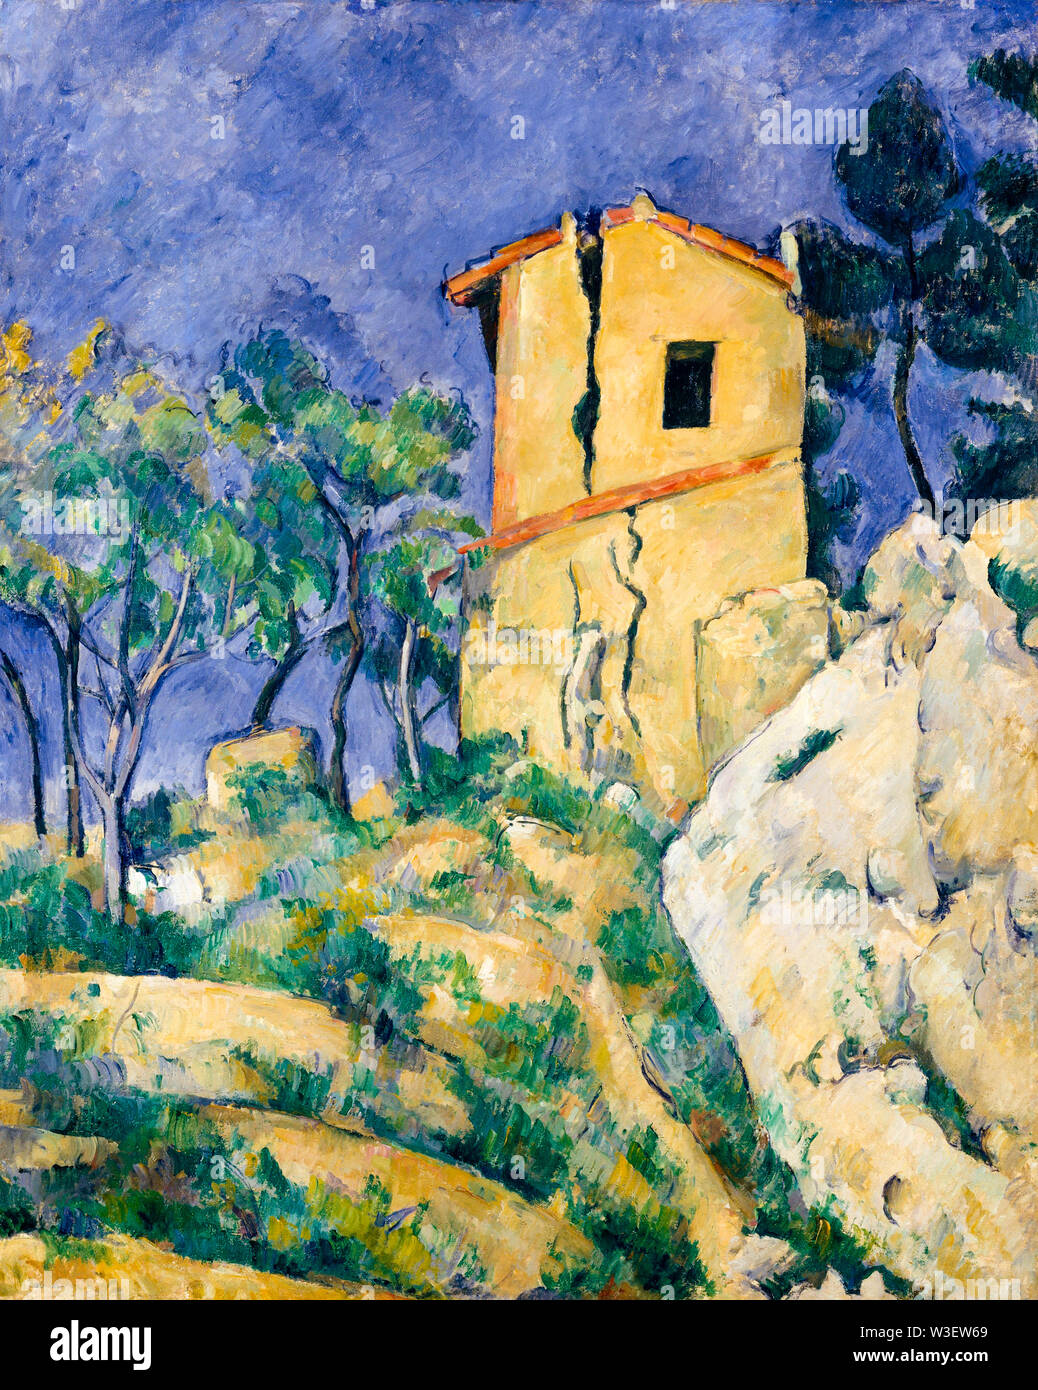 Paul Cézanne, The House with the Cracked Walls, landscape painting, 1892-1894 Stock Photo